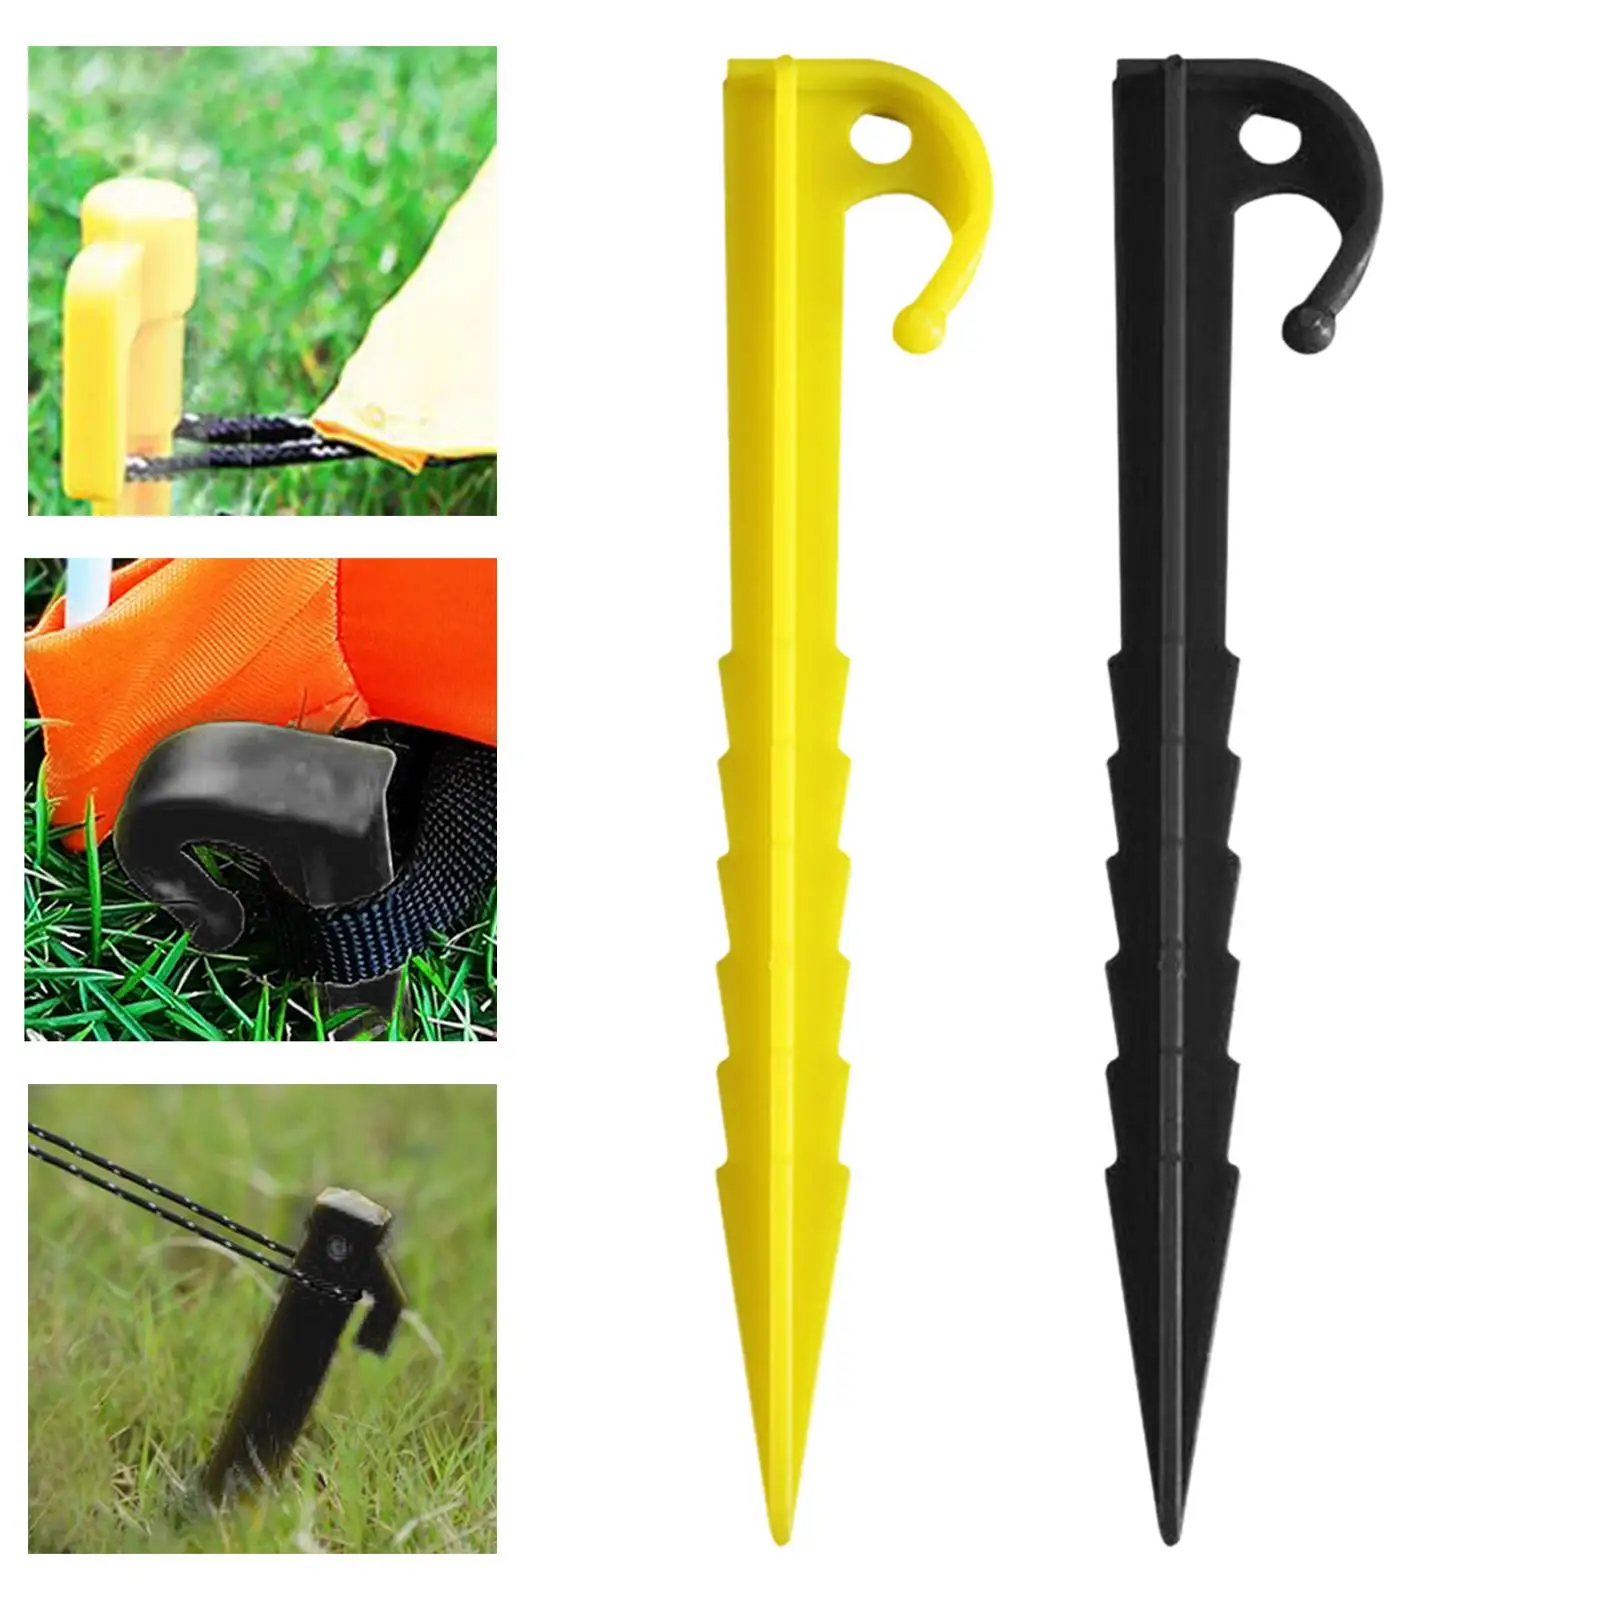 10x Portable Tent Pegs Stake Set Ground Nails Windproof Durable Ground Anchoring Pegs for Camping Hiking Picnic Canopy Accessory